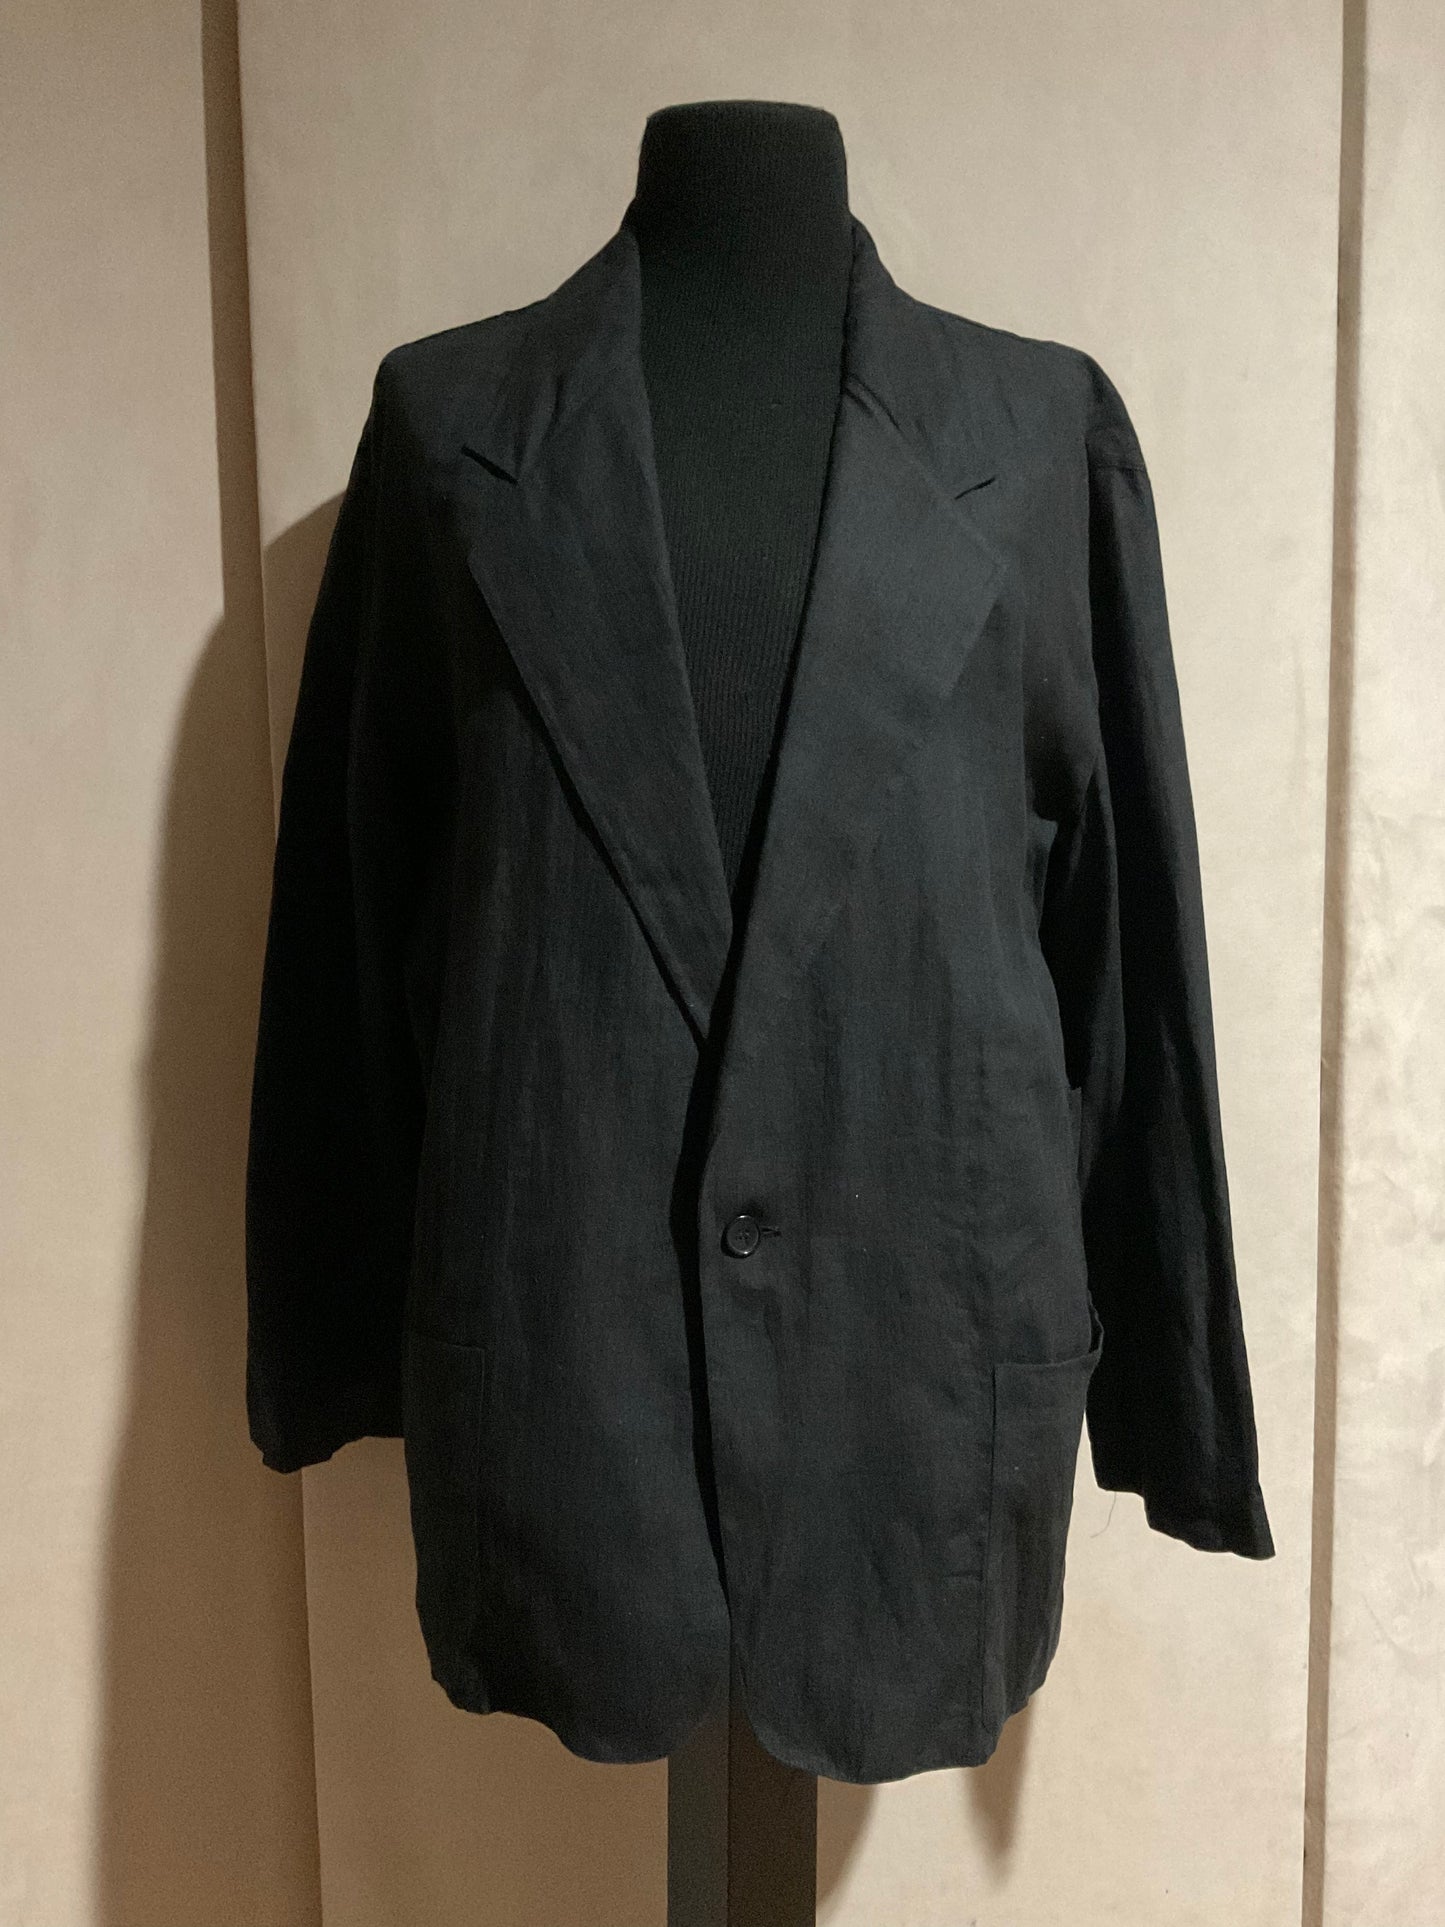 R P SPORTS JACKET / BLACK LINEN / UNCONSTRUCTED / LARGE - EXTRA LARGE / NEW / MADE IN ITALY